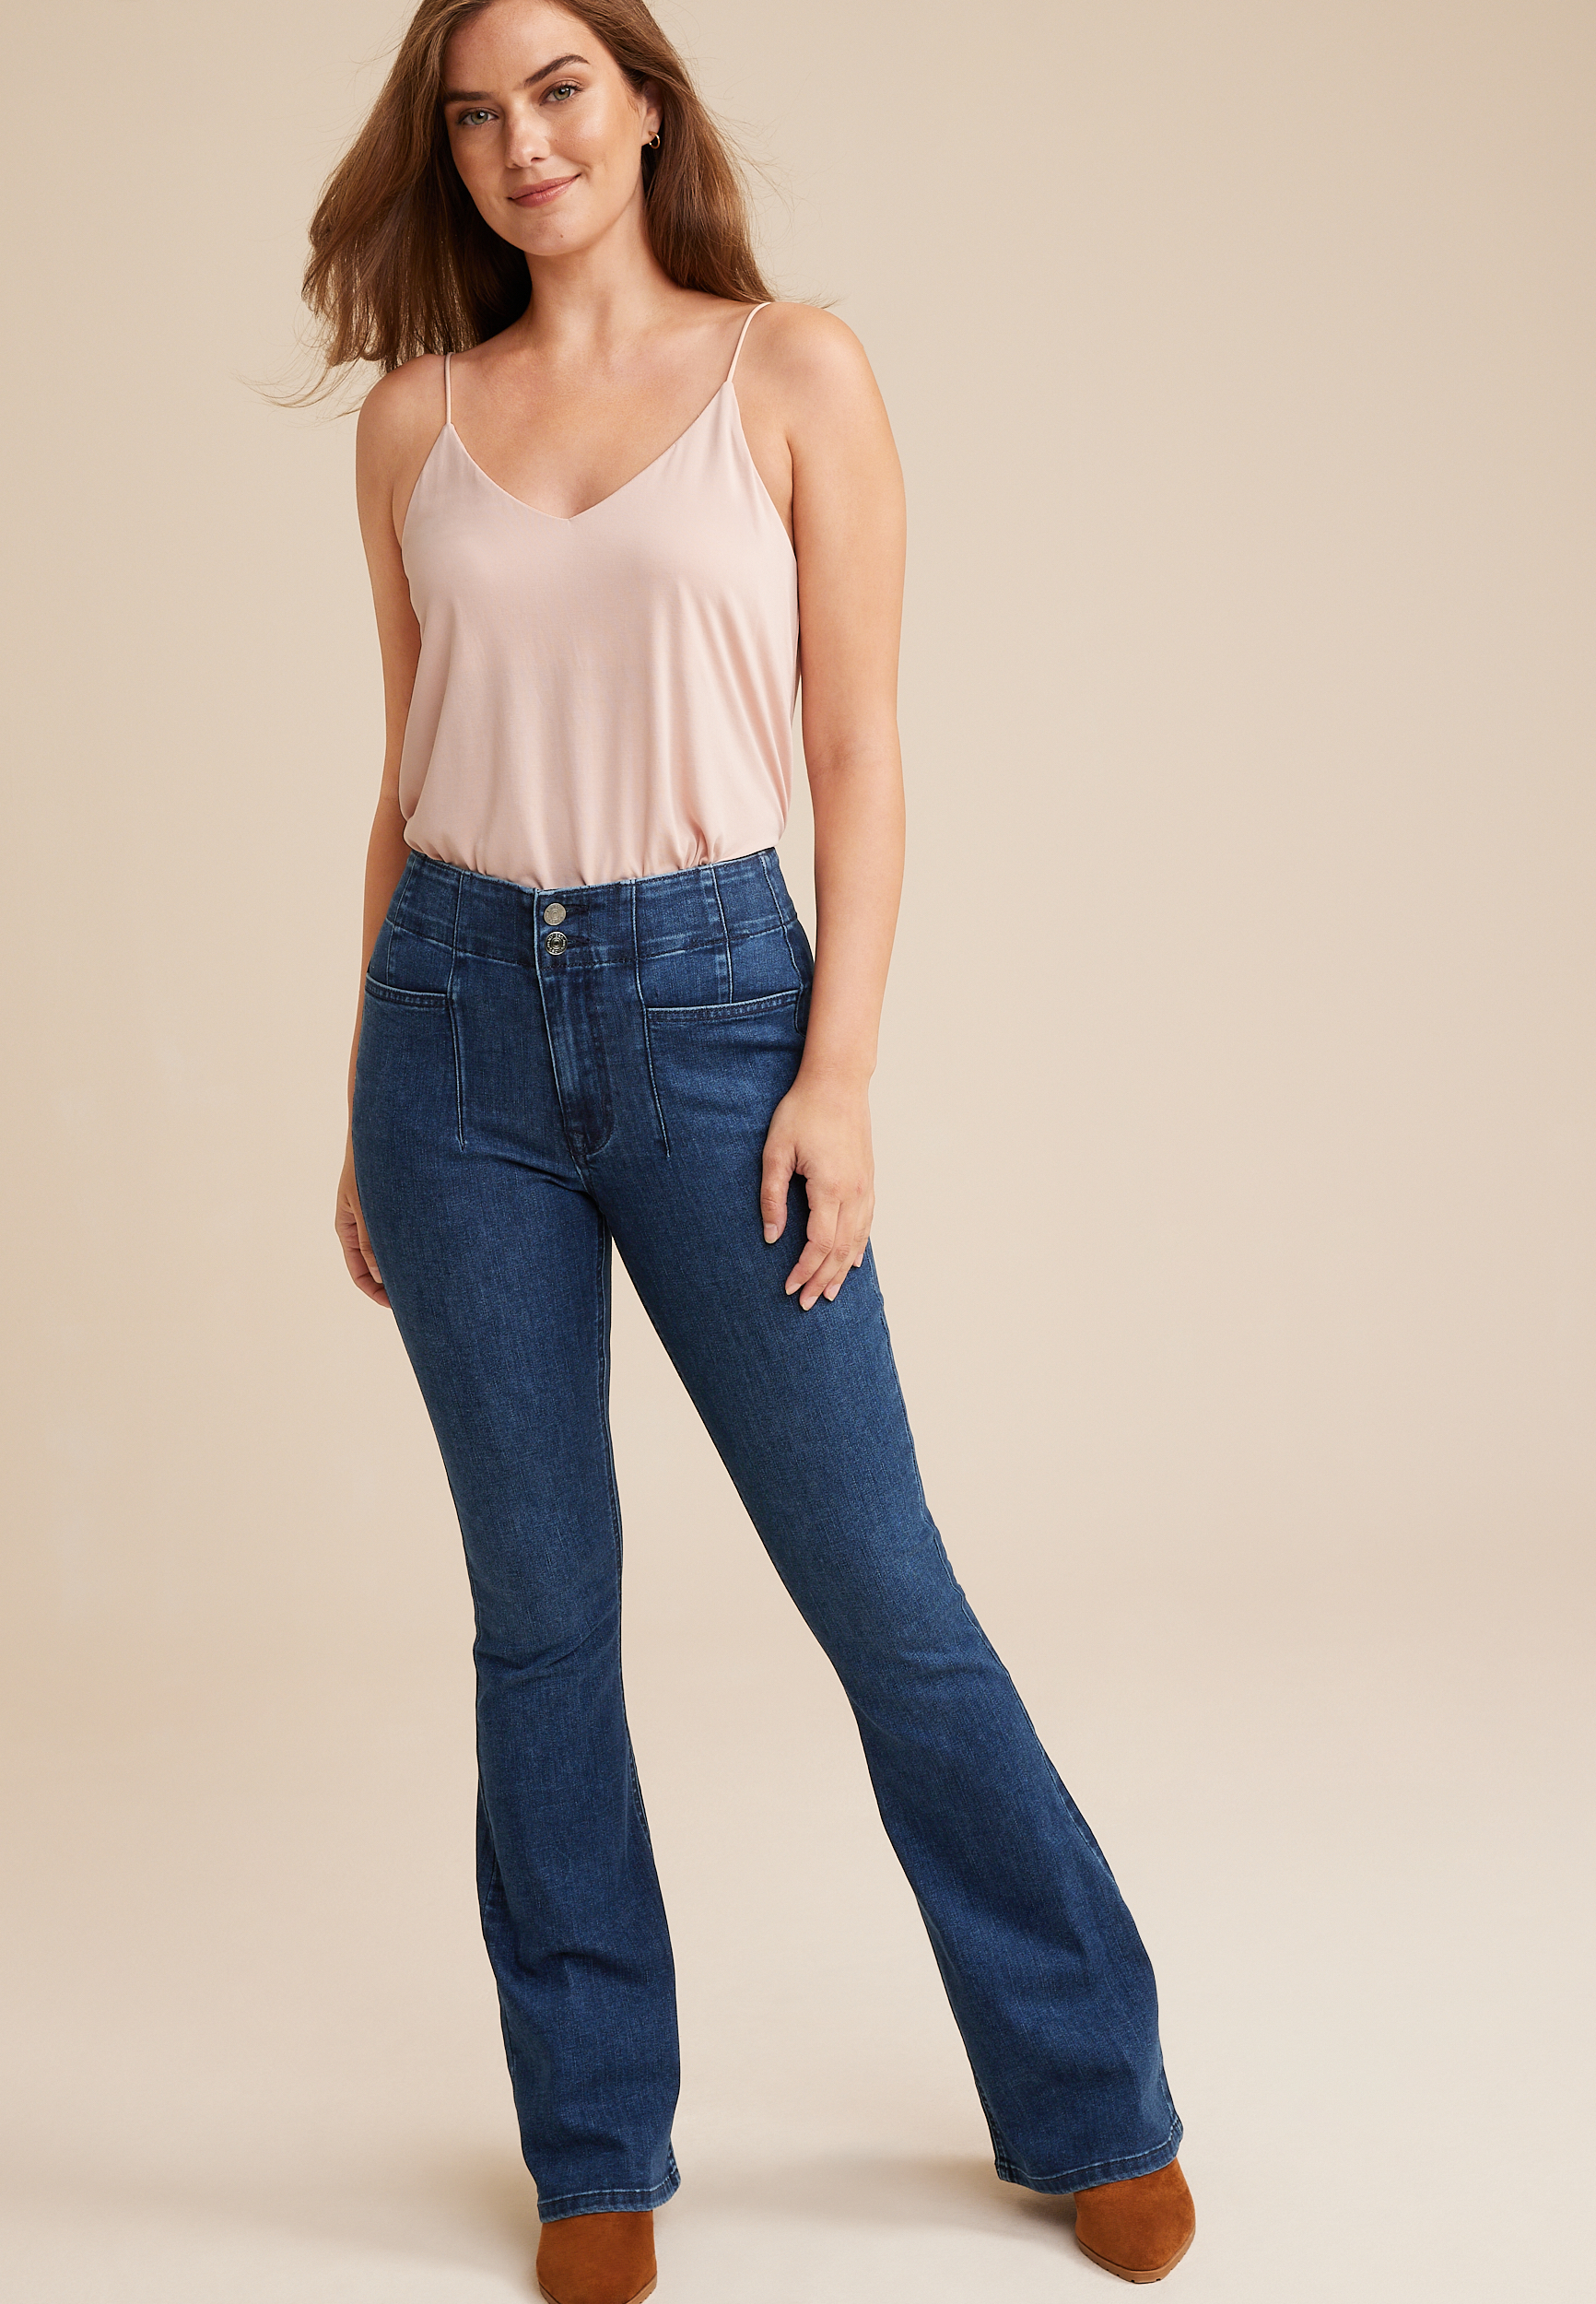 m jeans by maurices™ Classic Flare Mid Rise Jean